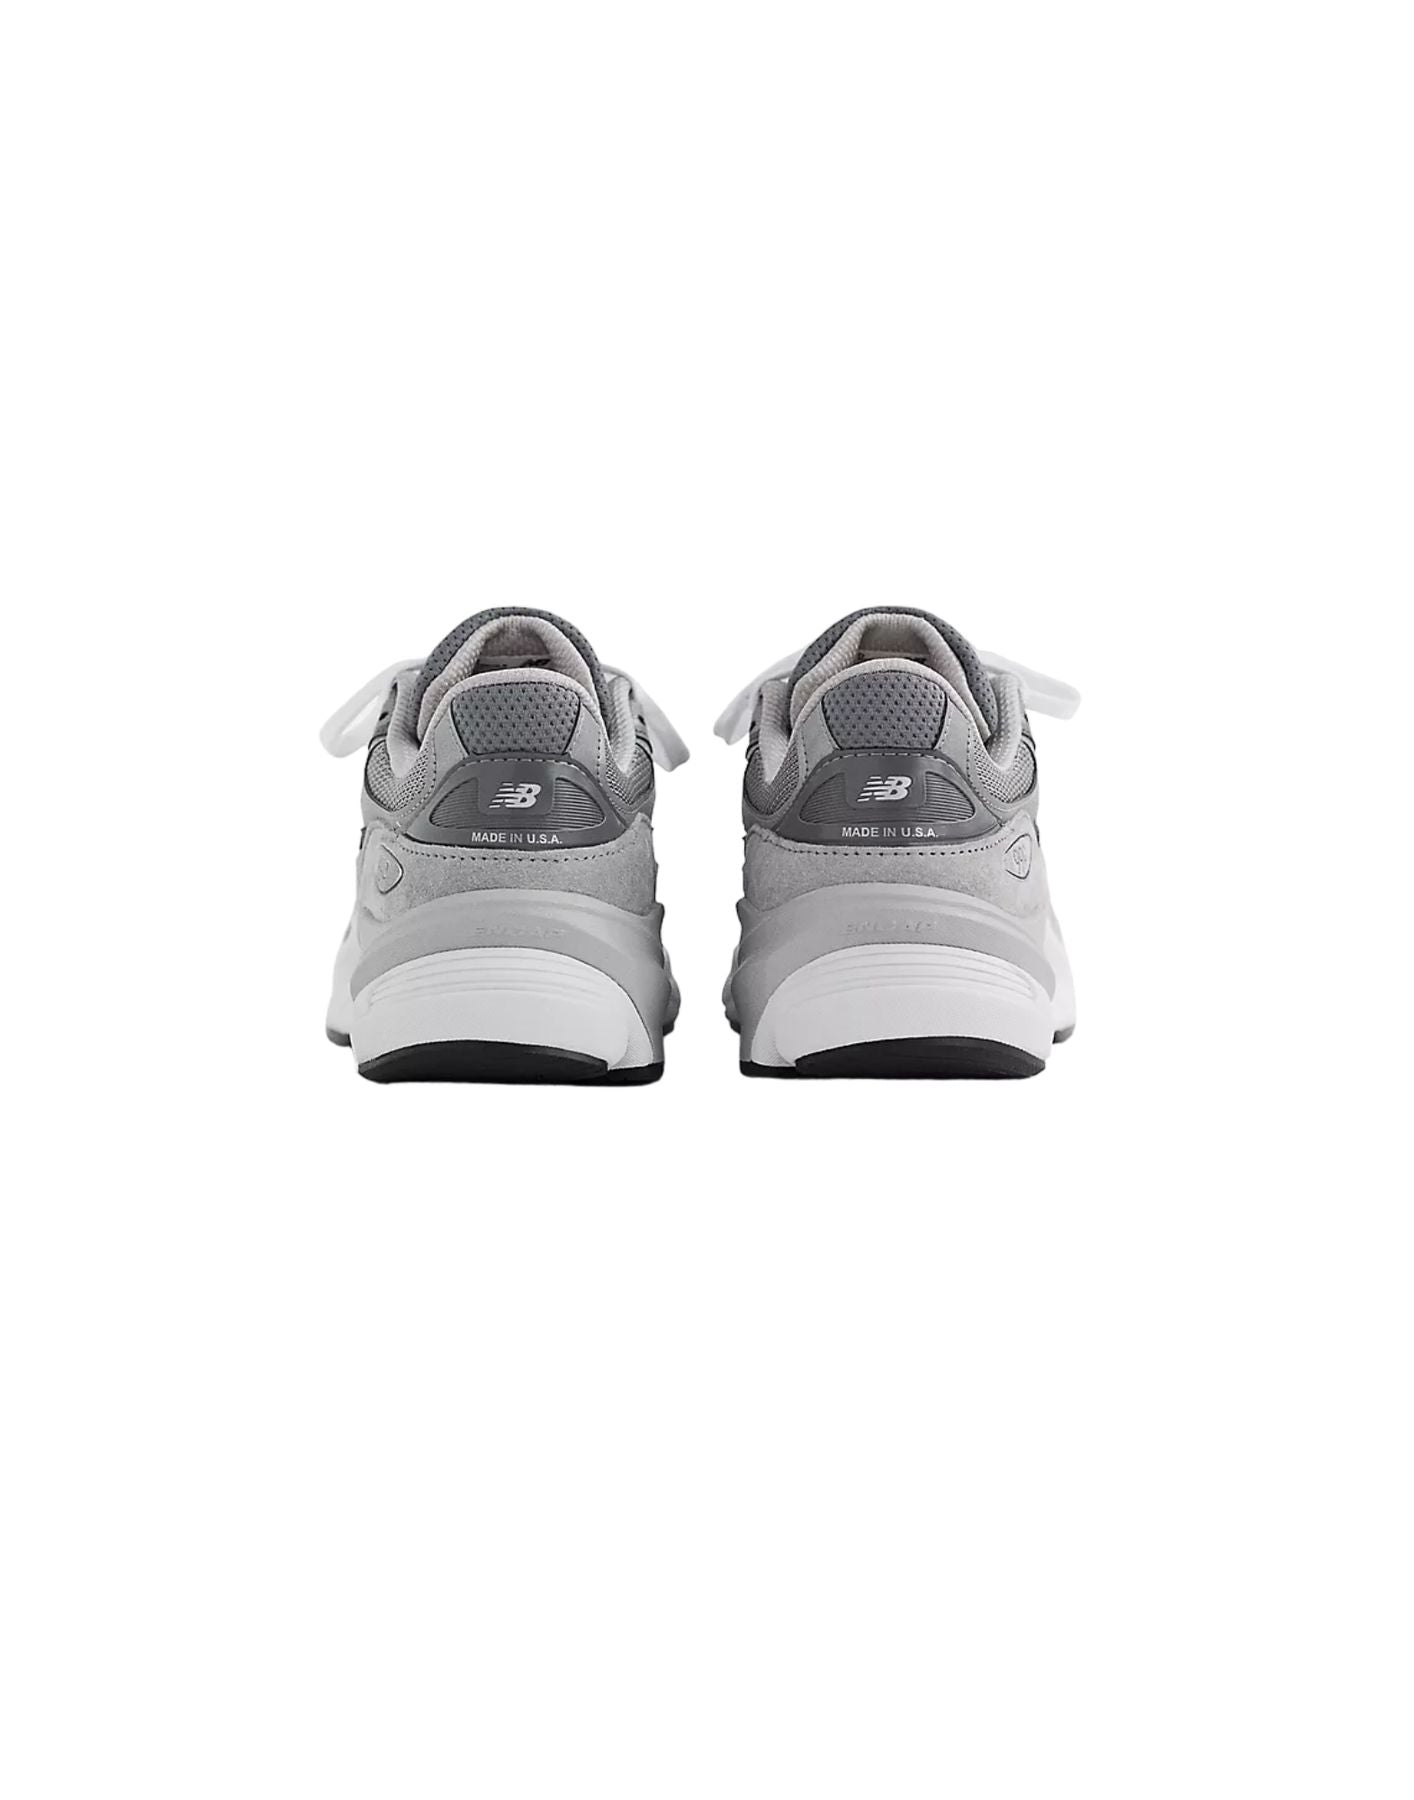 Shoes for woman W990GL6 NEW BALANCE